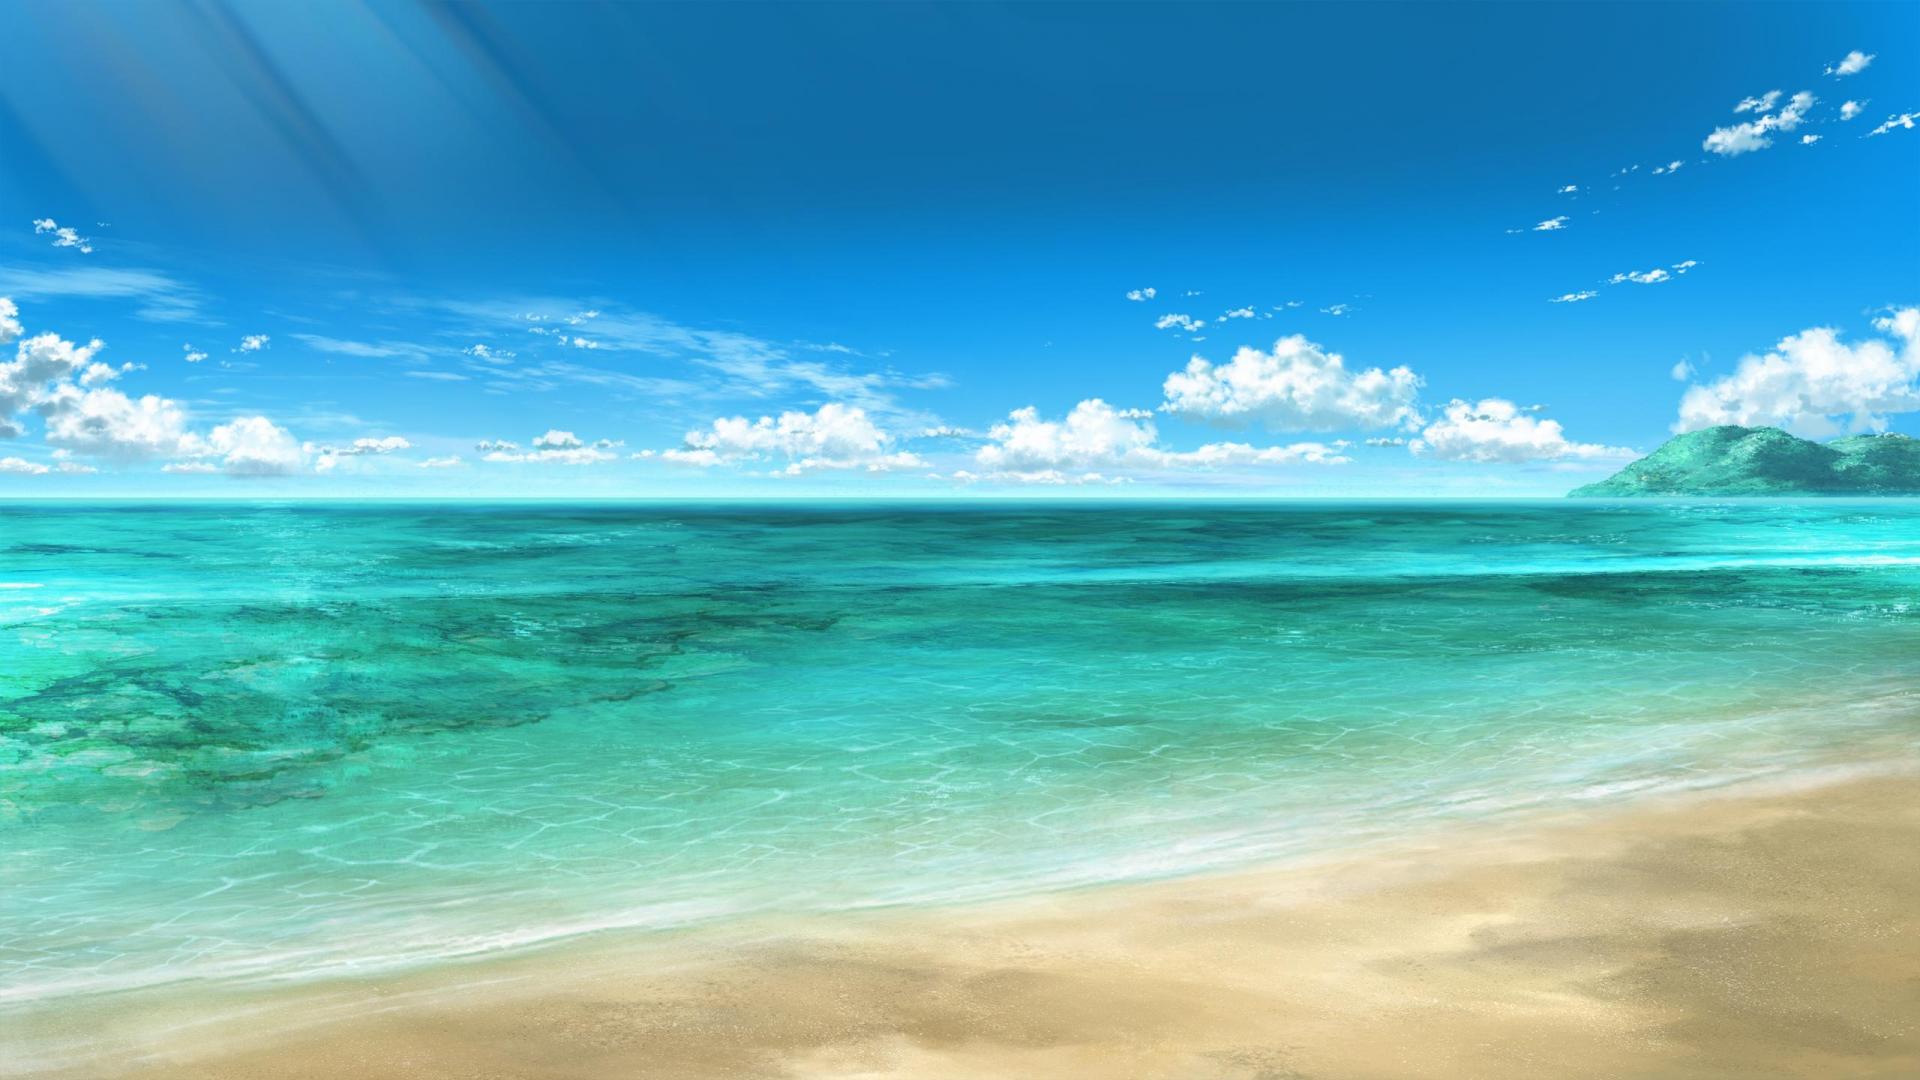 Seaside High Quality And Resolution Wallpaper On